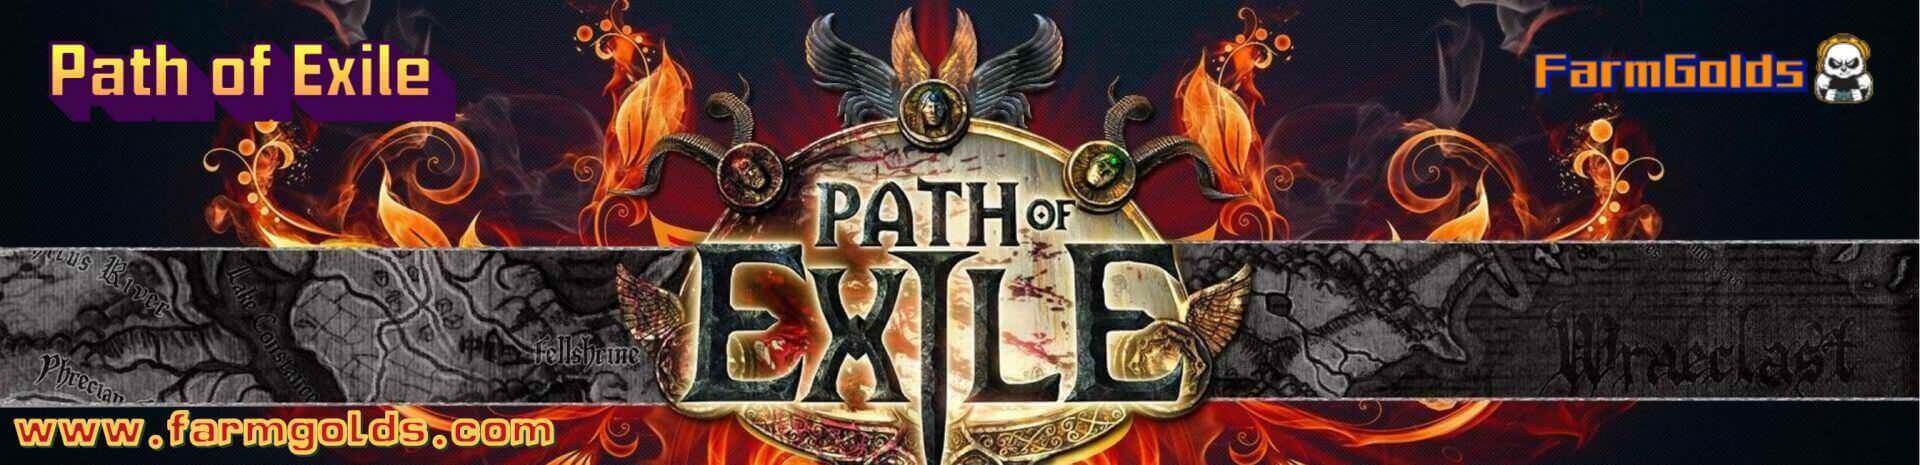 /path-of-exile